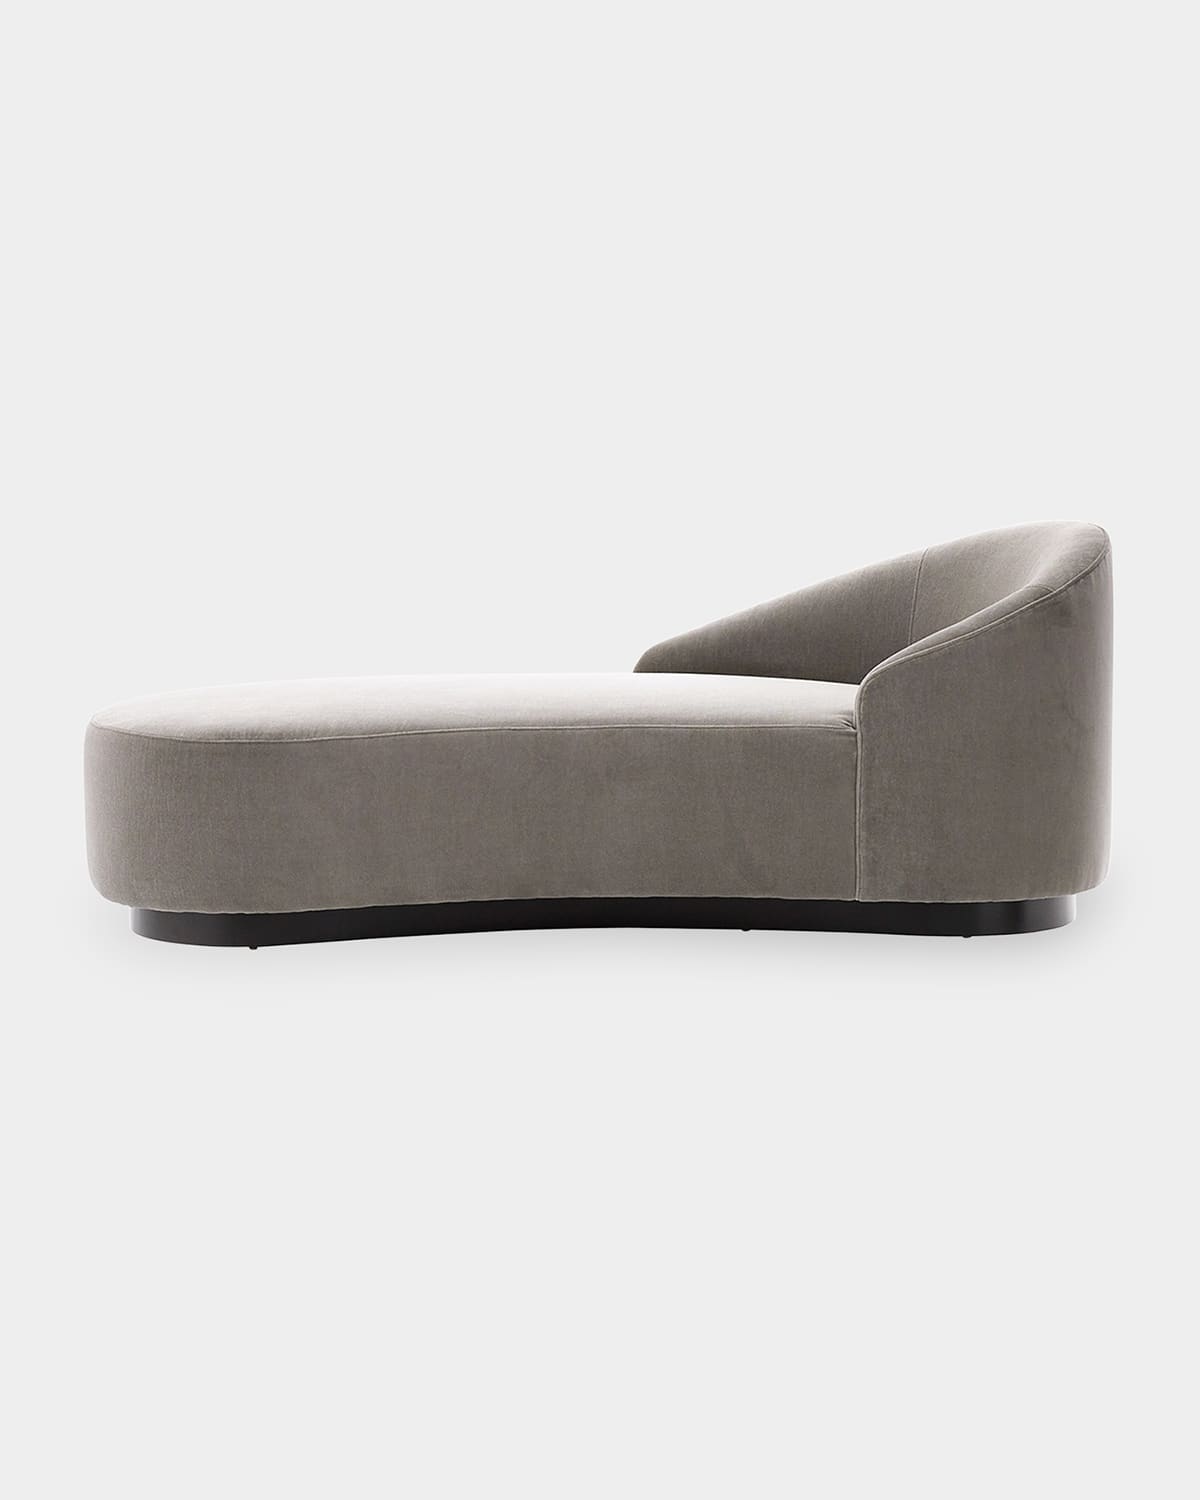 ARTERIORS TURNER RIGHT ARM CHAISE